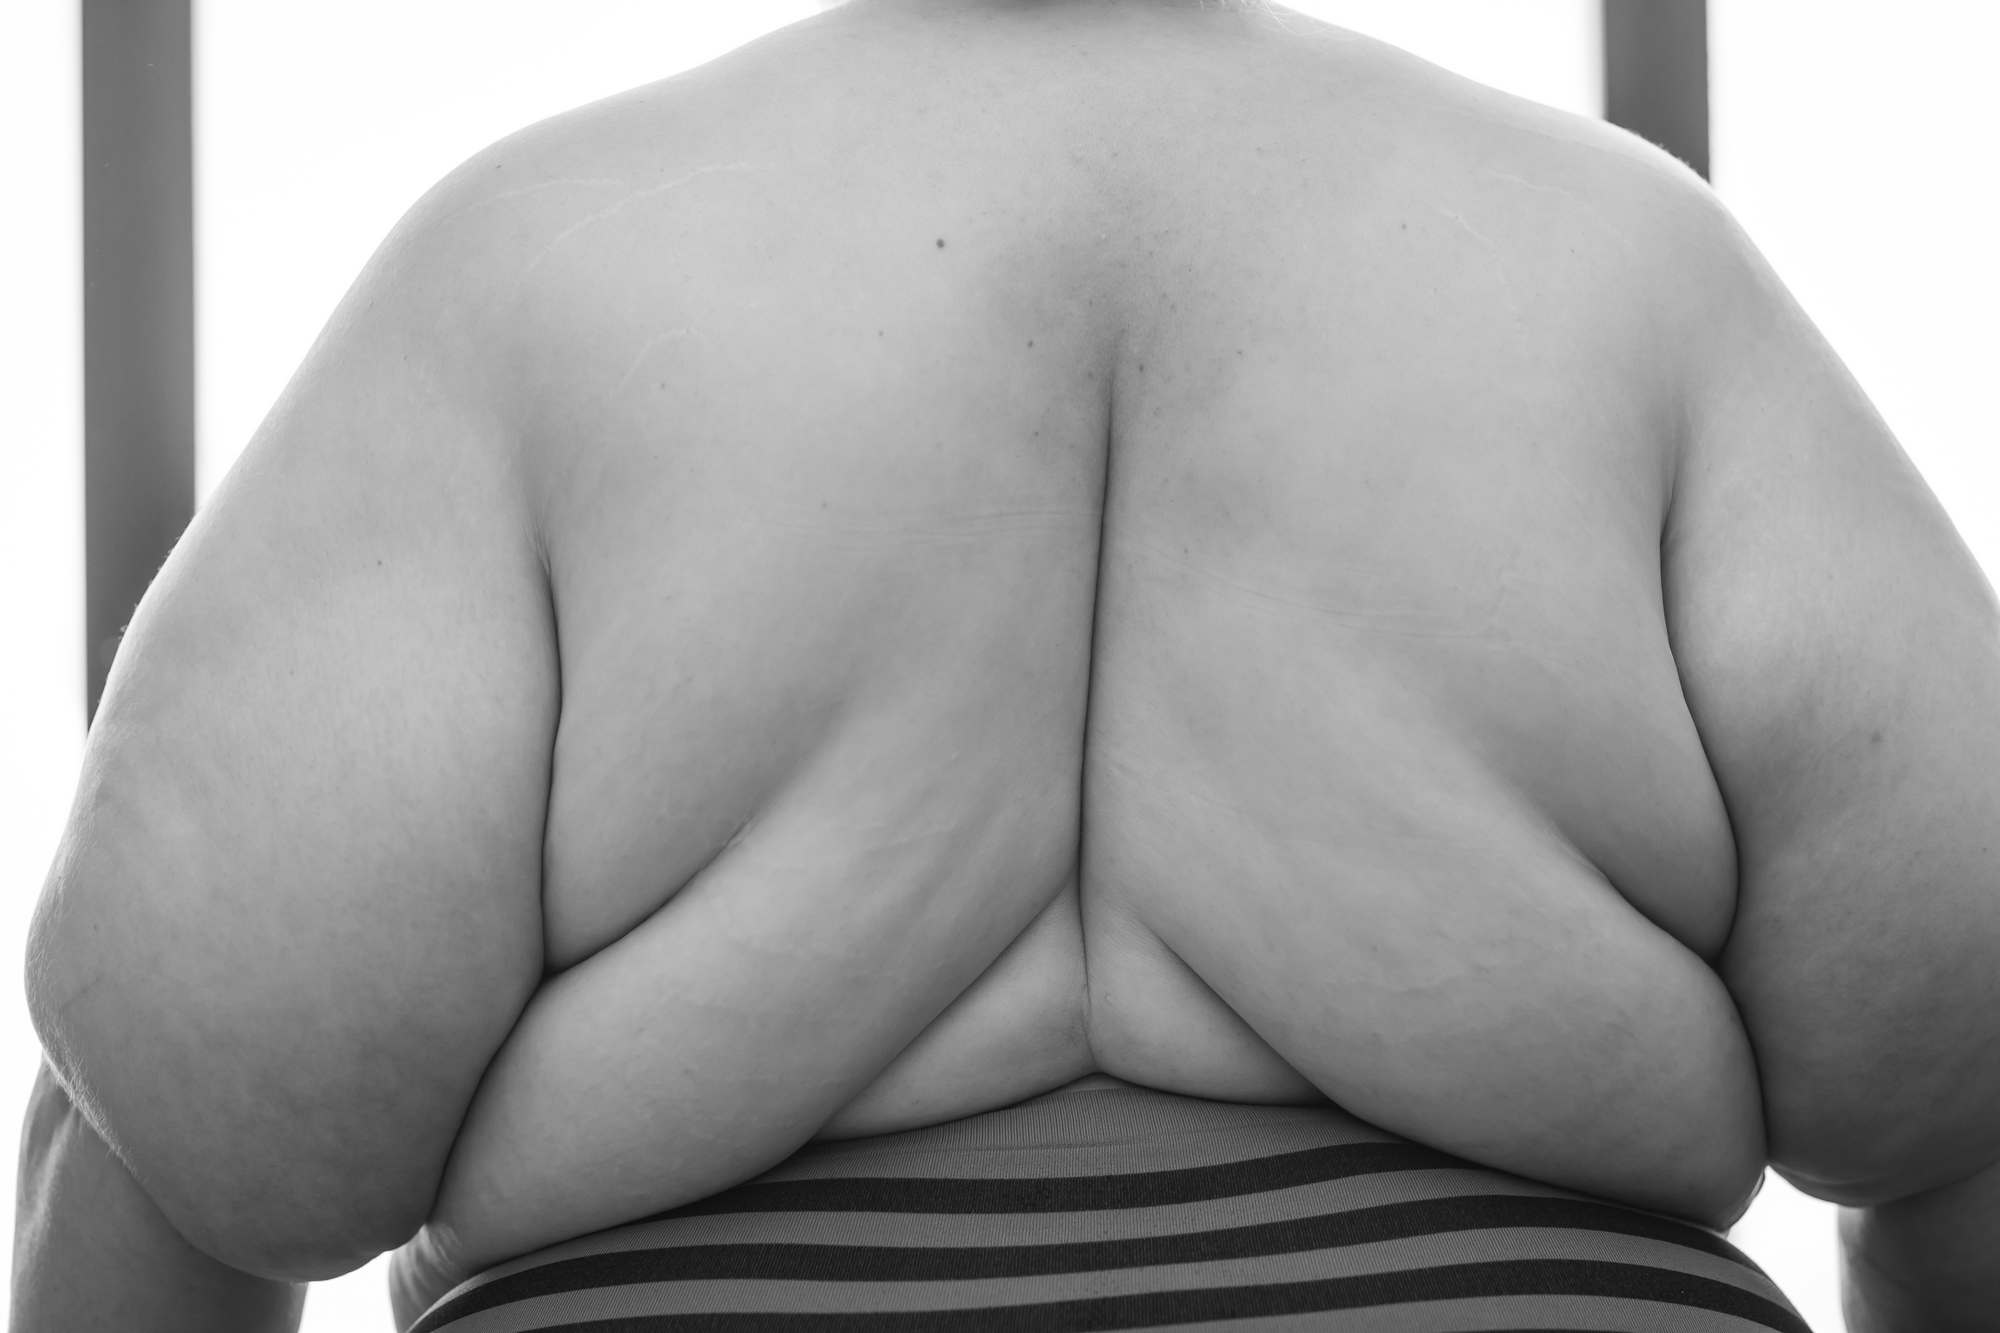 A fat person's back folds are displayed prominently in a fat positive photo shoot